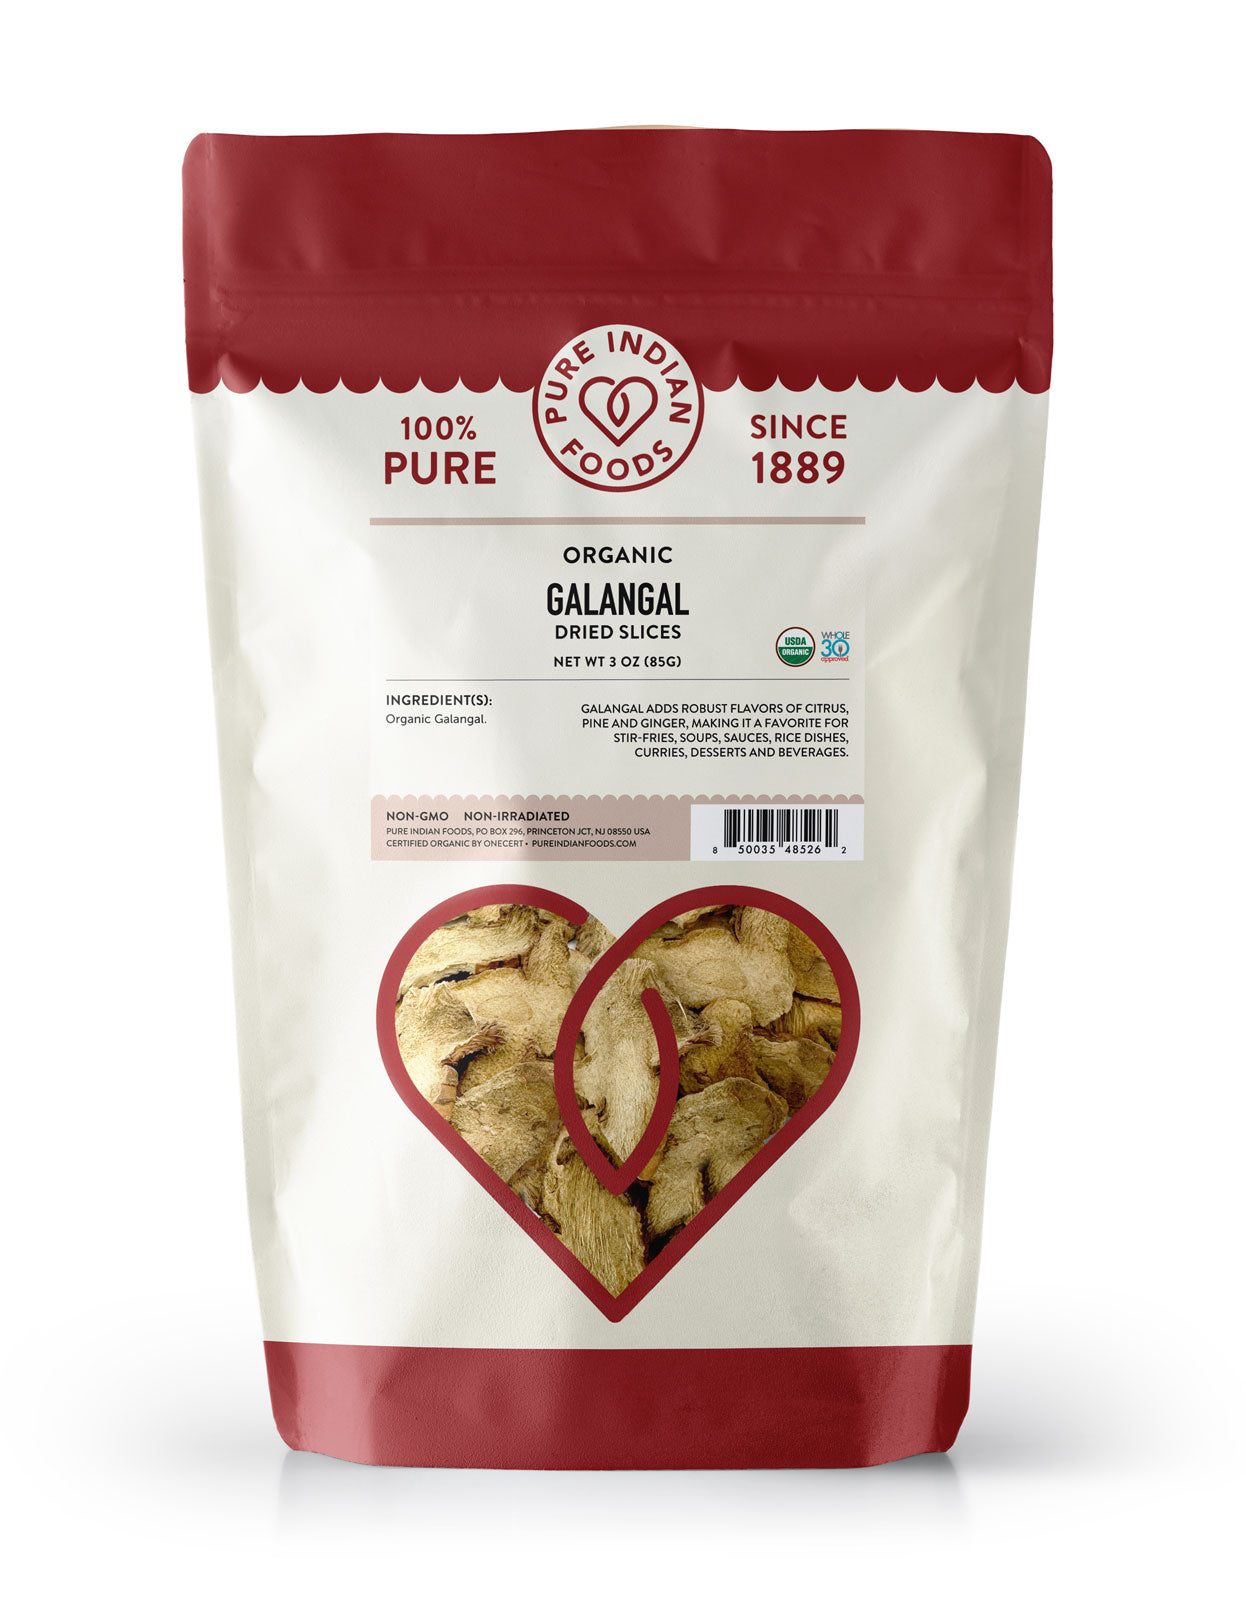 Galangal Dried Slices, Certified Organic - 3 oz